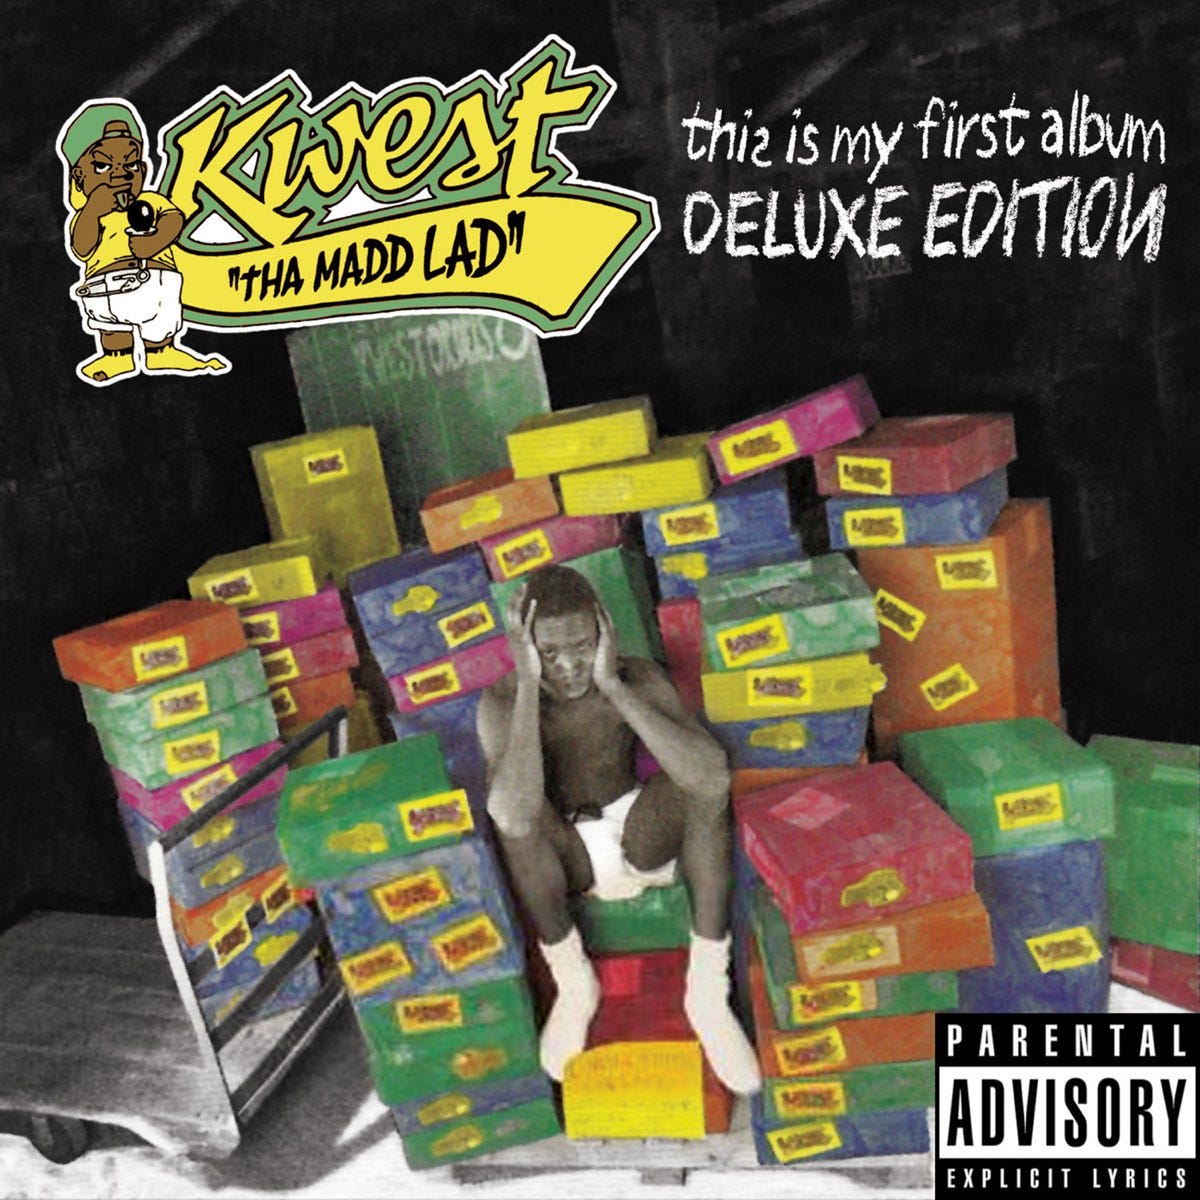 This Is My First Album (The Deluxe Edition) - Album by Kwest Tha Madd Lad -  Apple Music